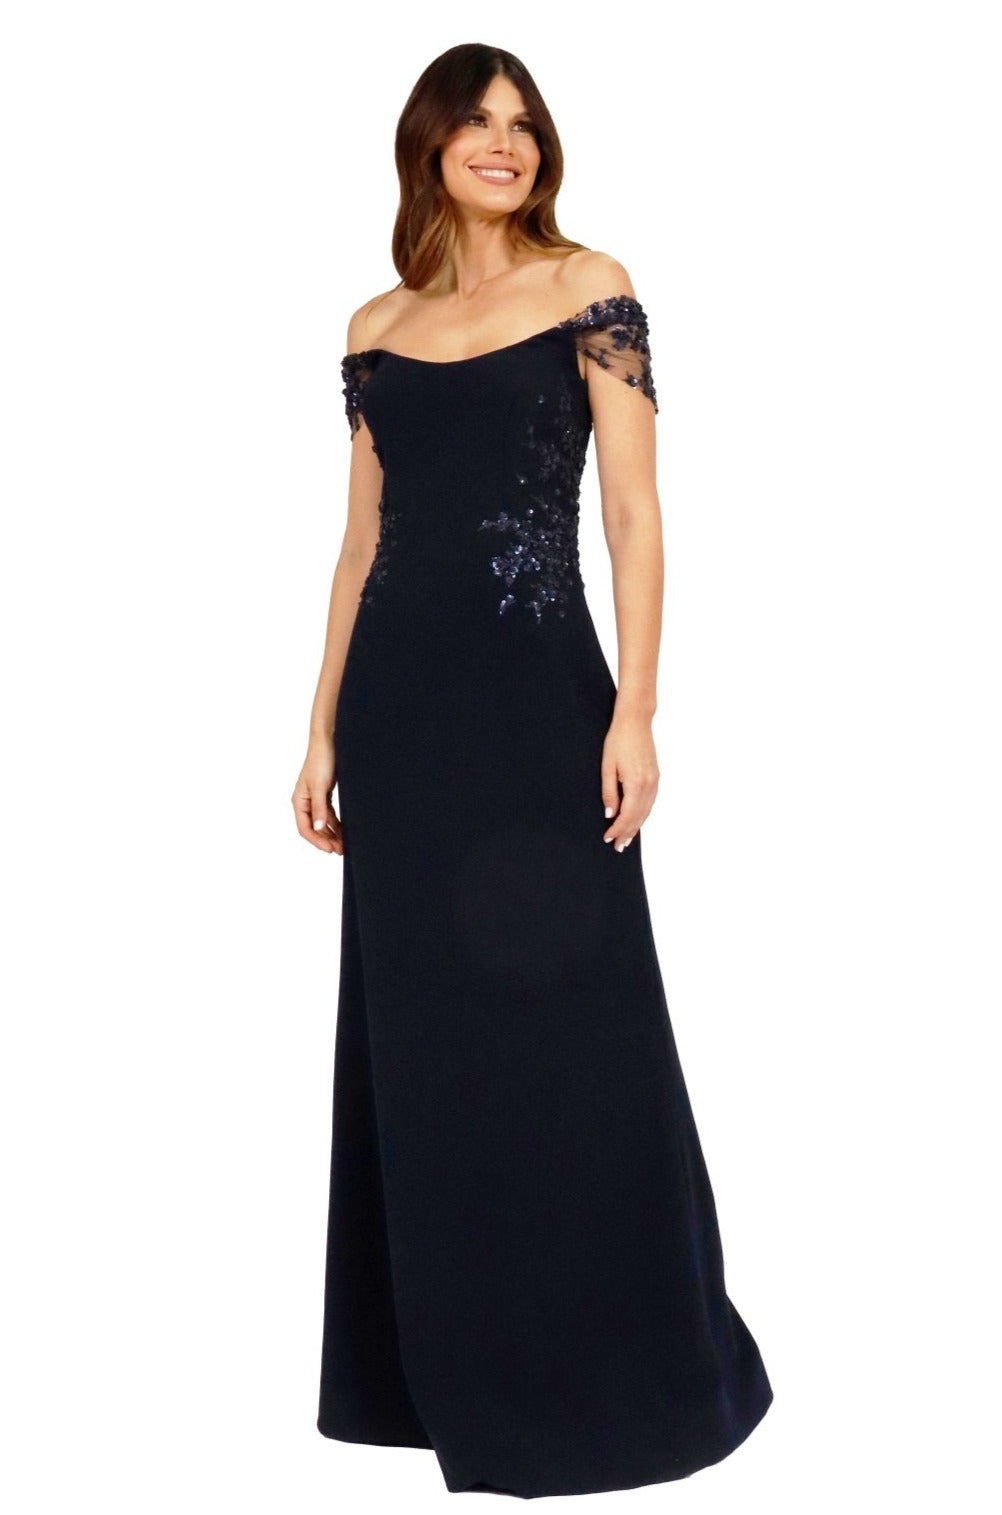 Crepe Gown with Floral Applique  